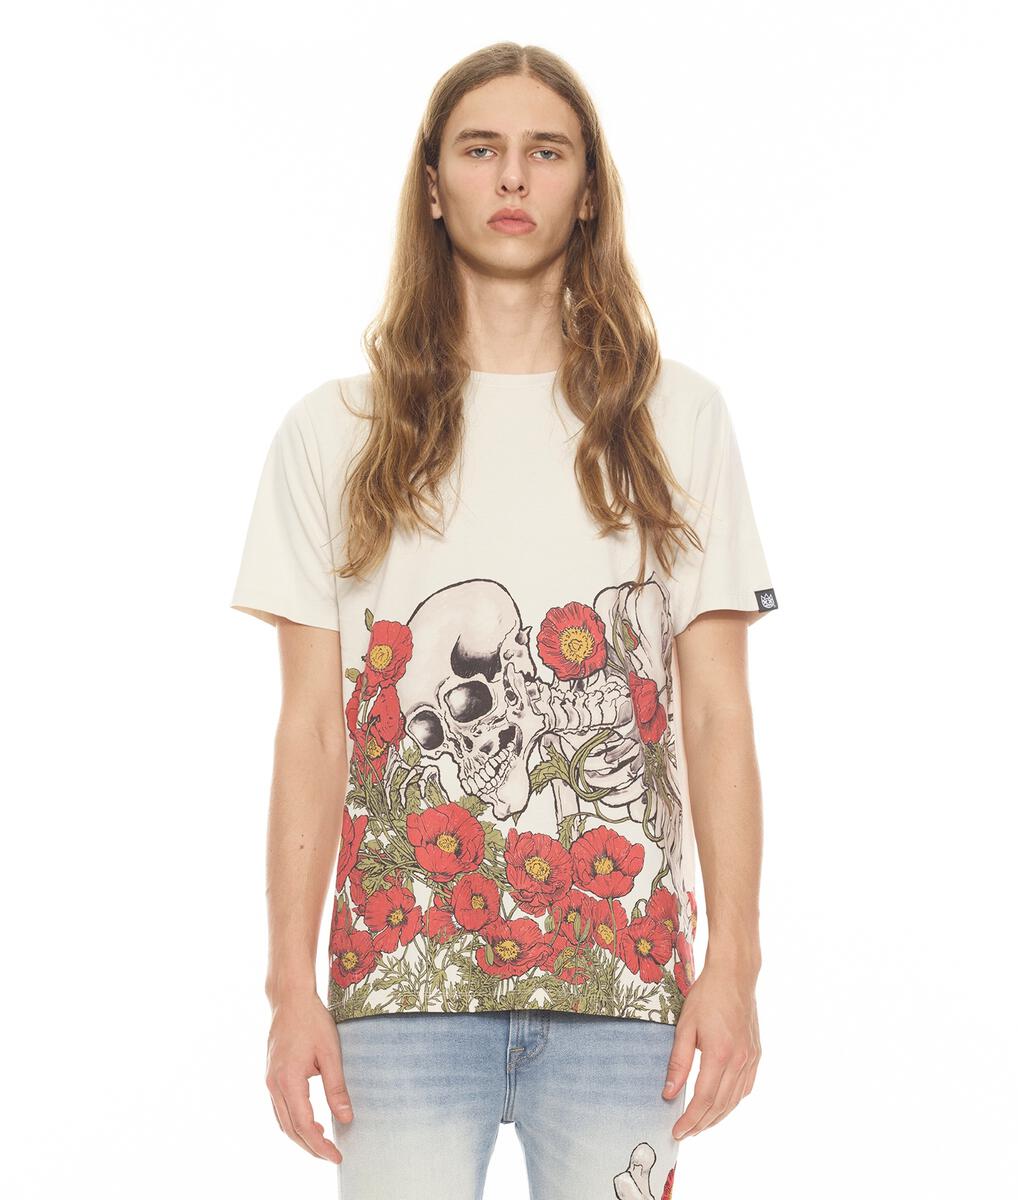 Cult Of Individuality - Short Sleeve Crew Neck Tee "Poppy" In Cream - 622B8-K49A